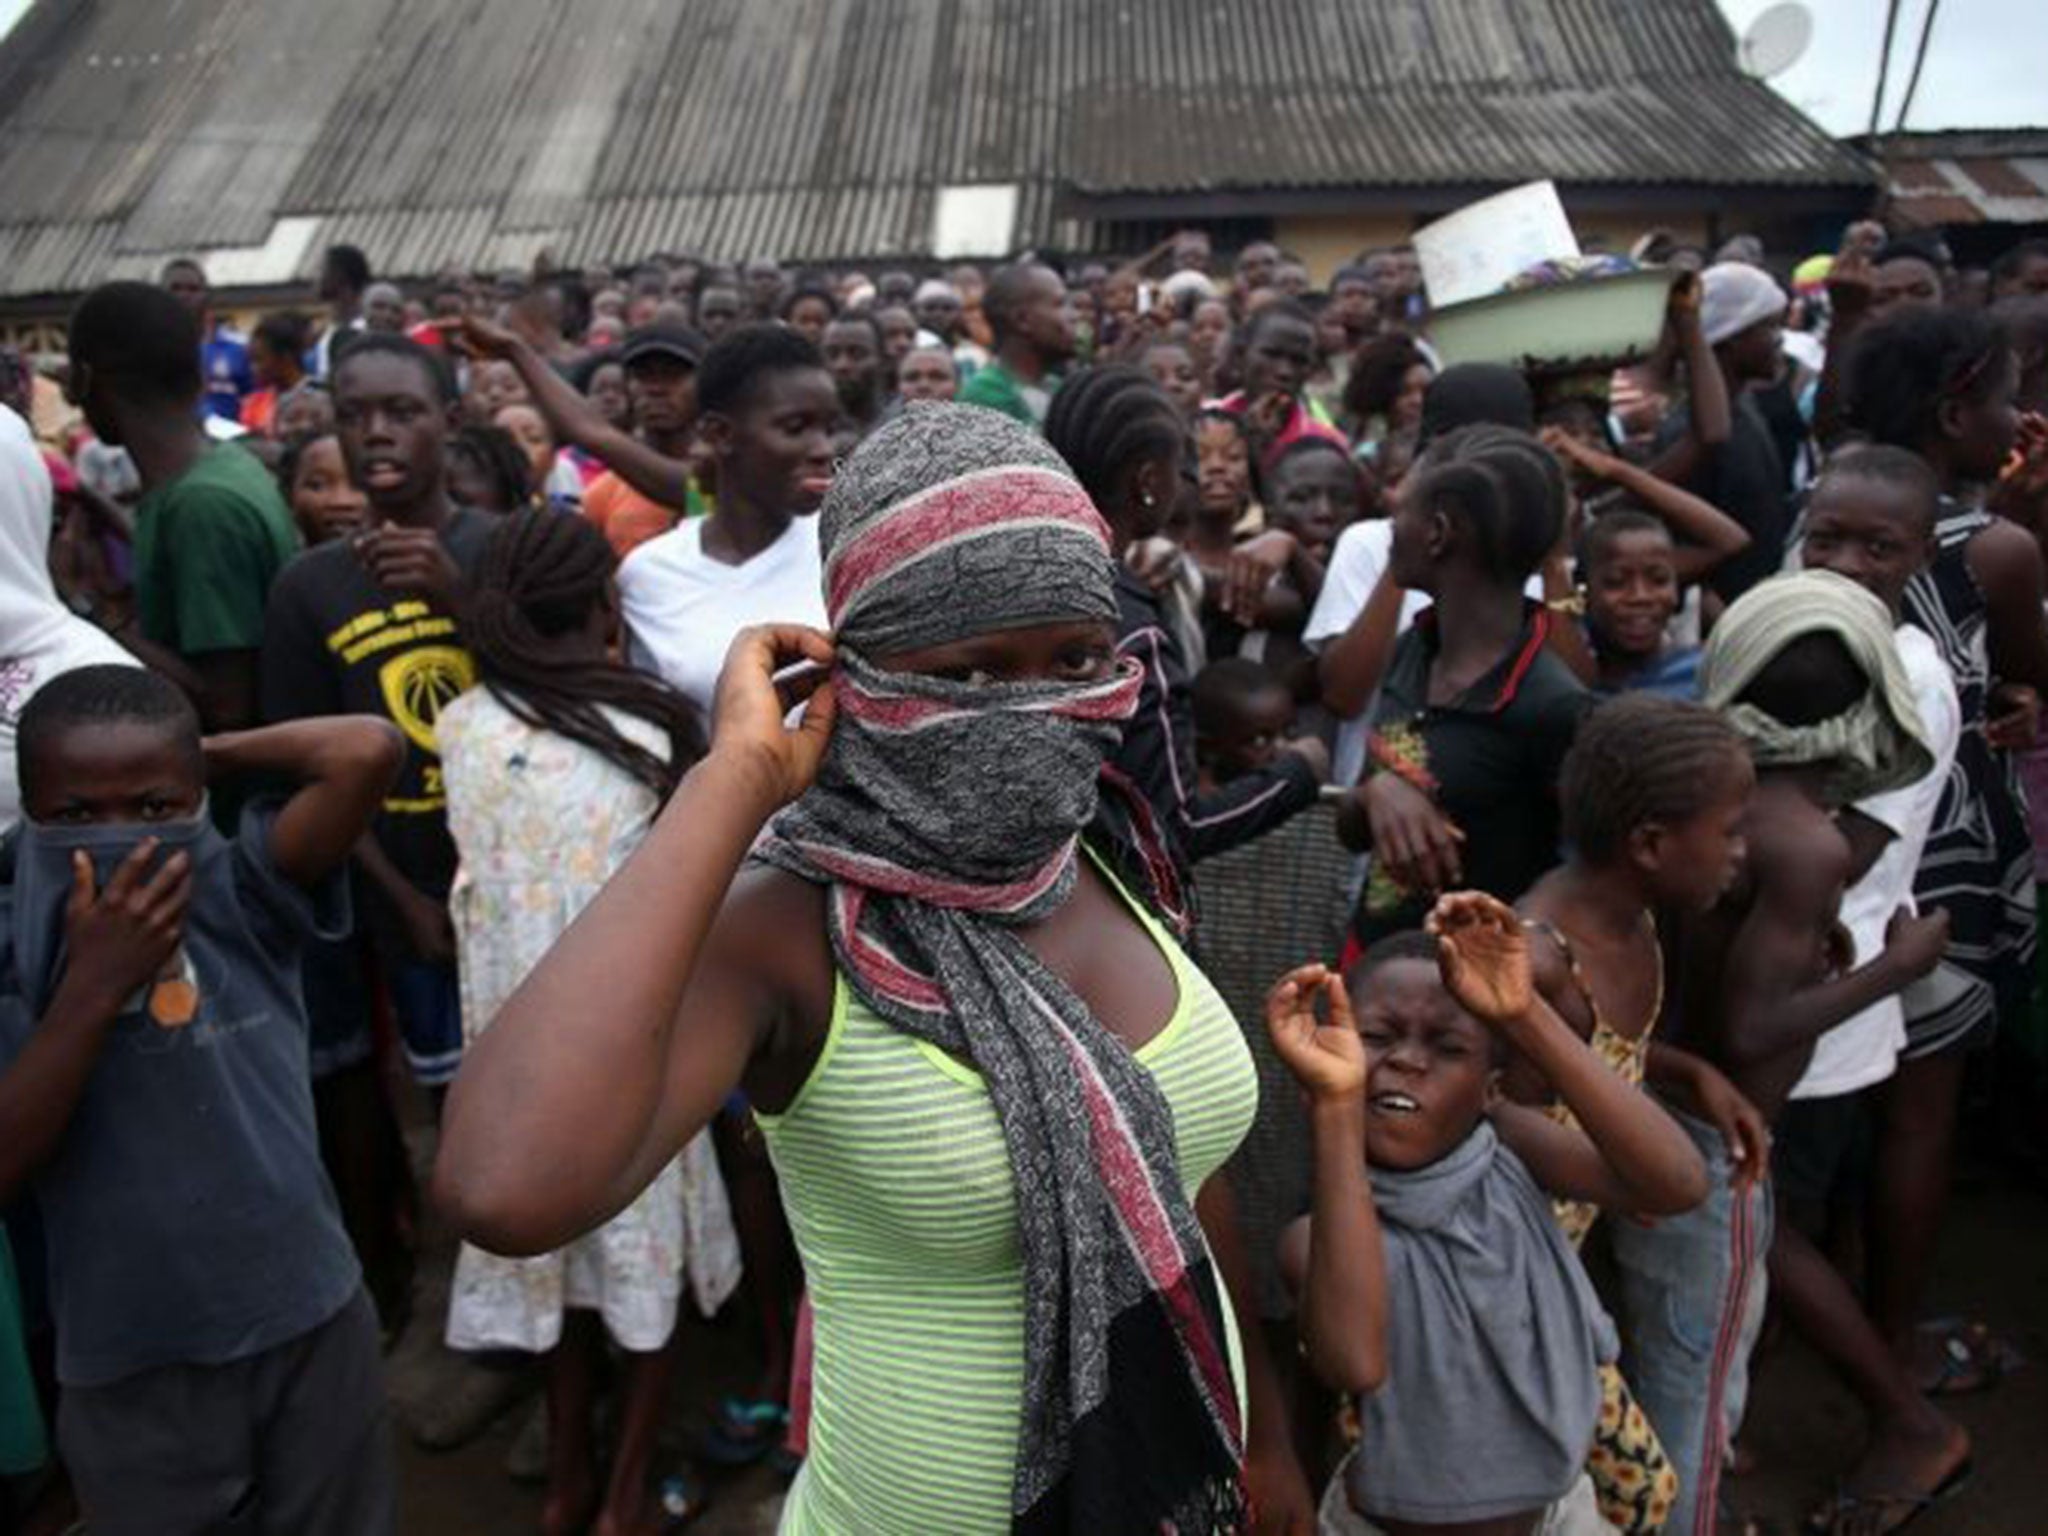 A crowd enters the grounds of an Ebola isolation center in the West Point slum on August 16, 2014 in Monrovia, Liberia. A mob of several hundred people, chanting, "No Ebola in West Point," opened the gates and took out the patients, many saying that the E